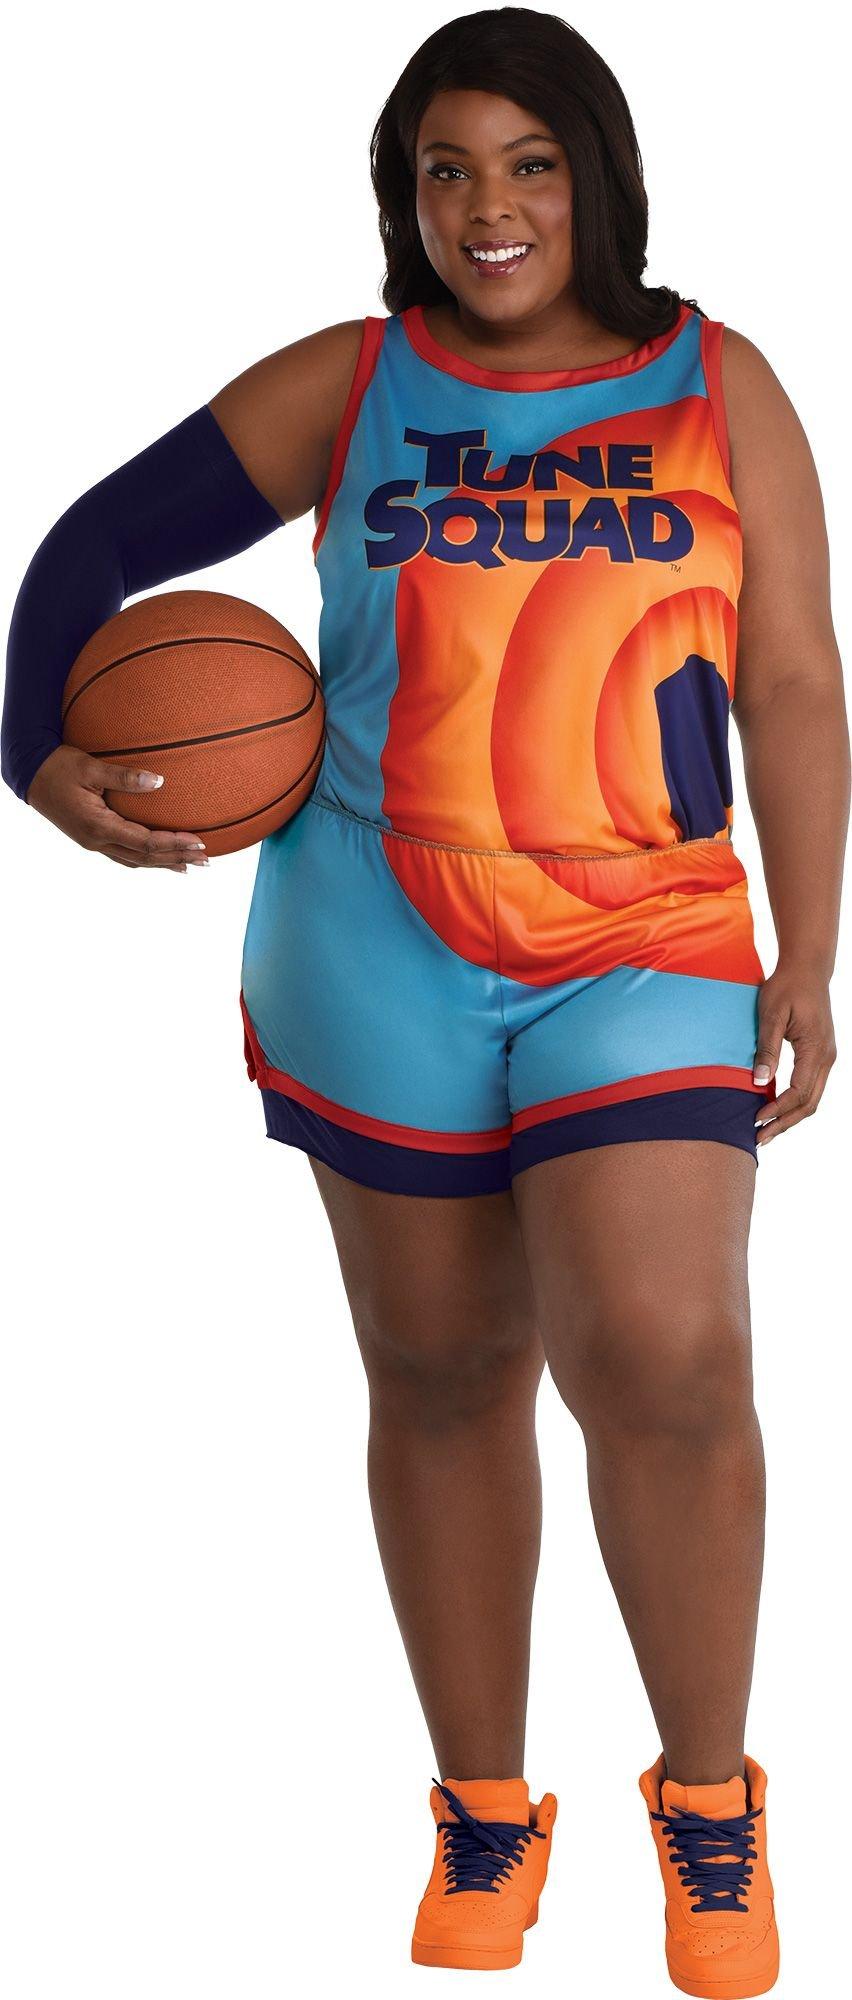 Bugs and Lola Bunny Tune Squad Couples Halloween Costume